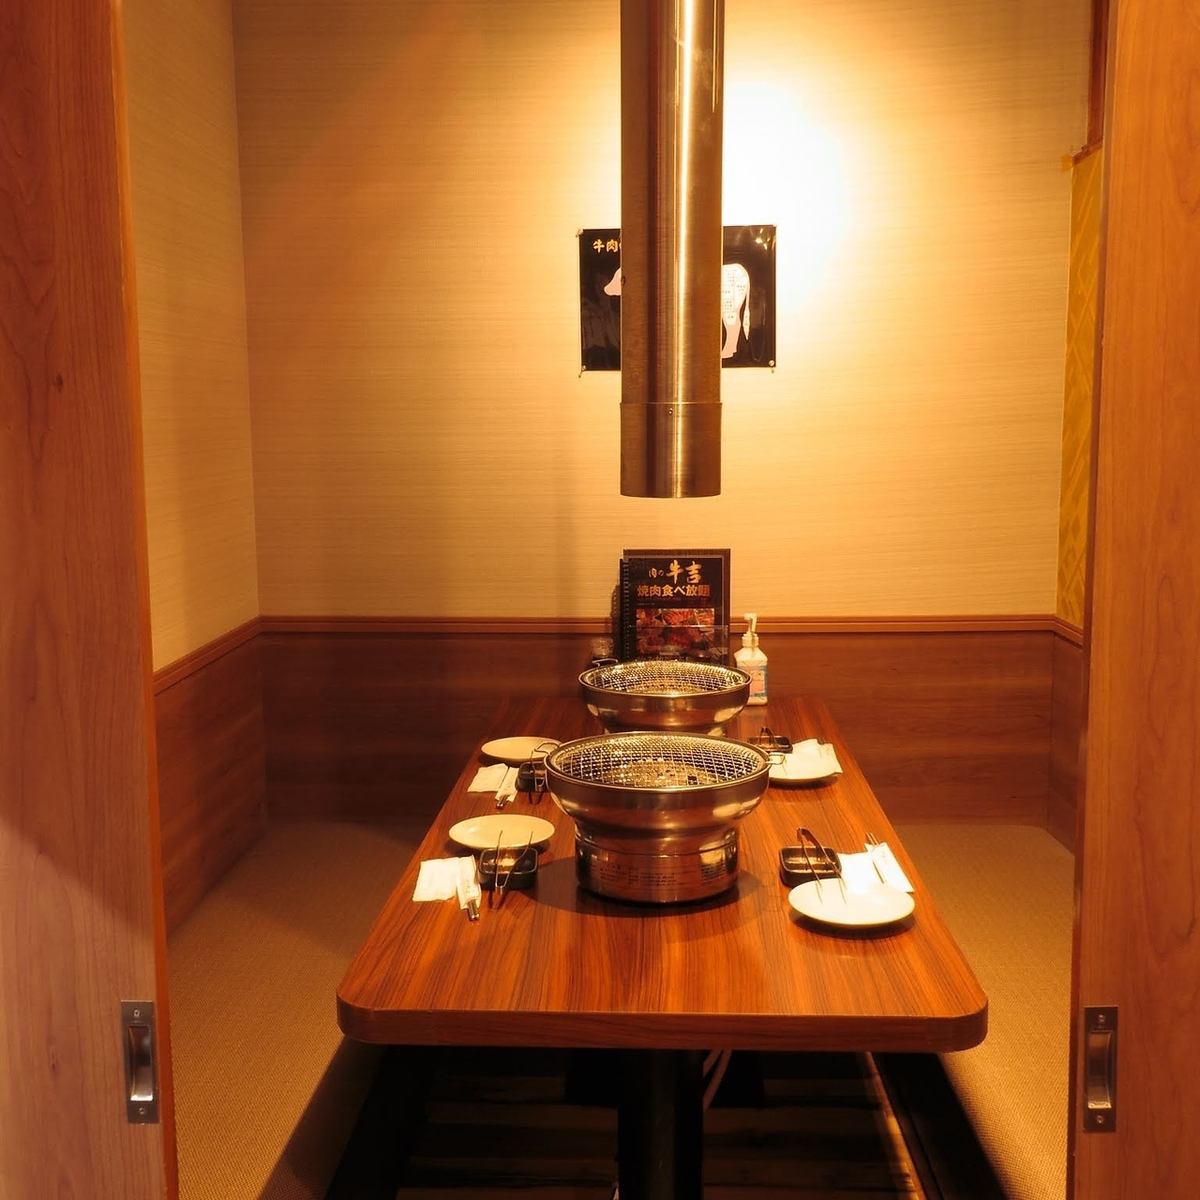 A popular private room for those who want to have an incognito date or have a relaxing meal☆